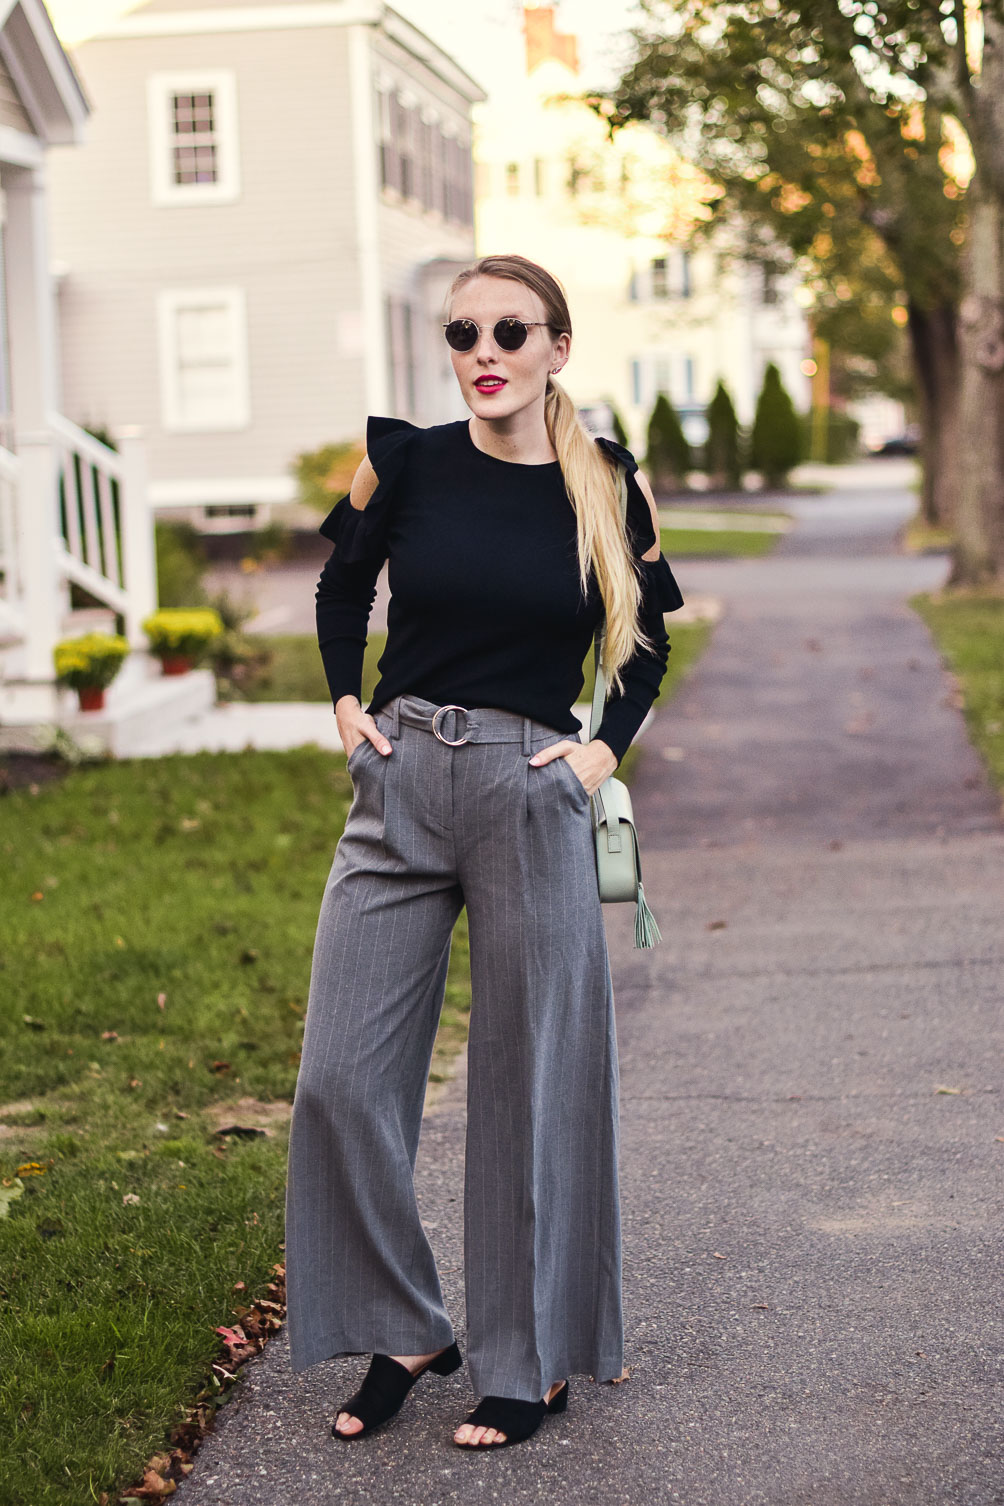 styling an easy classic holiday outfit for your work party with this cold shoulder ruffle sweater and pinstripe trousers